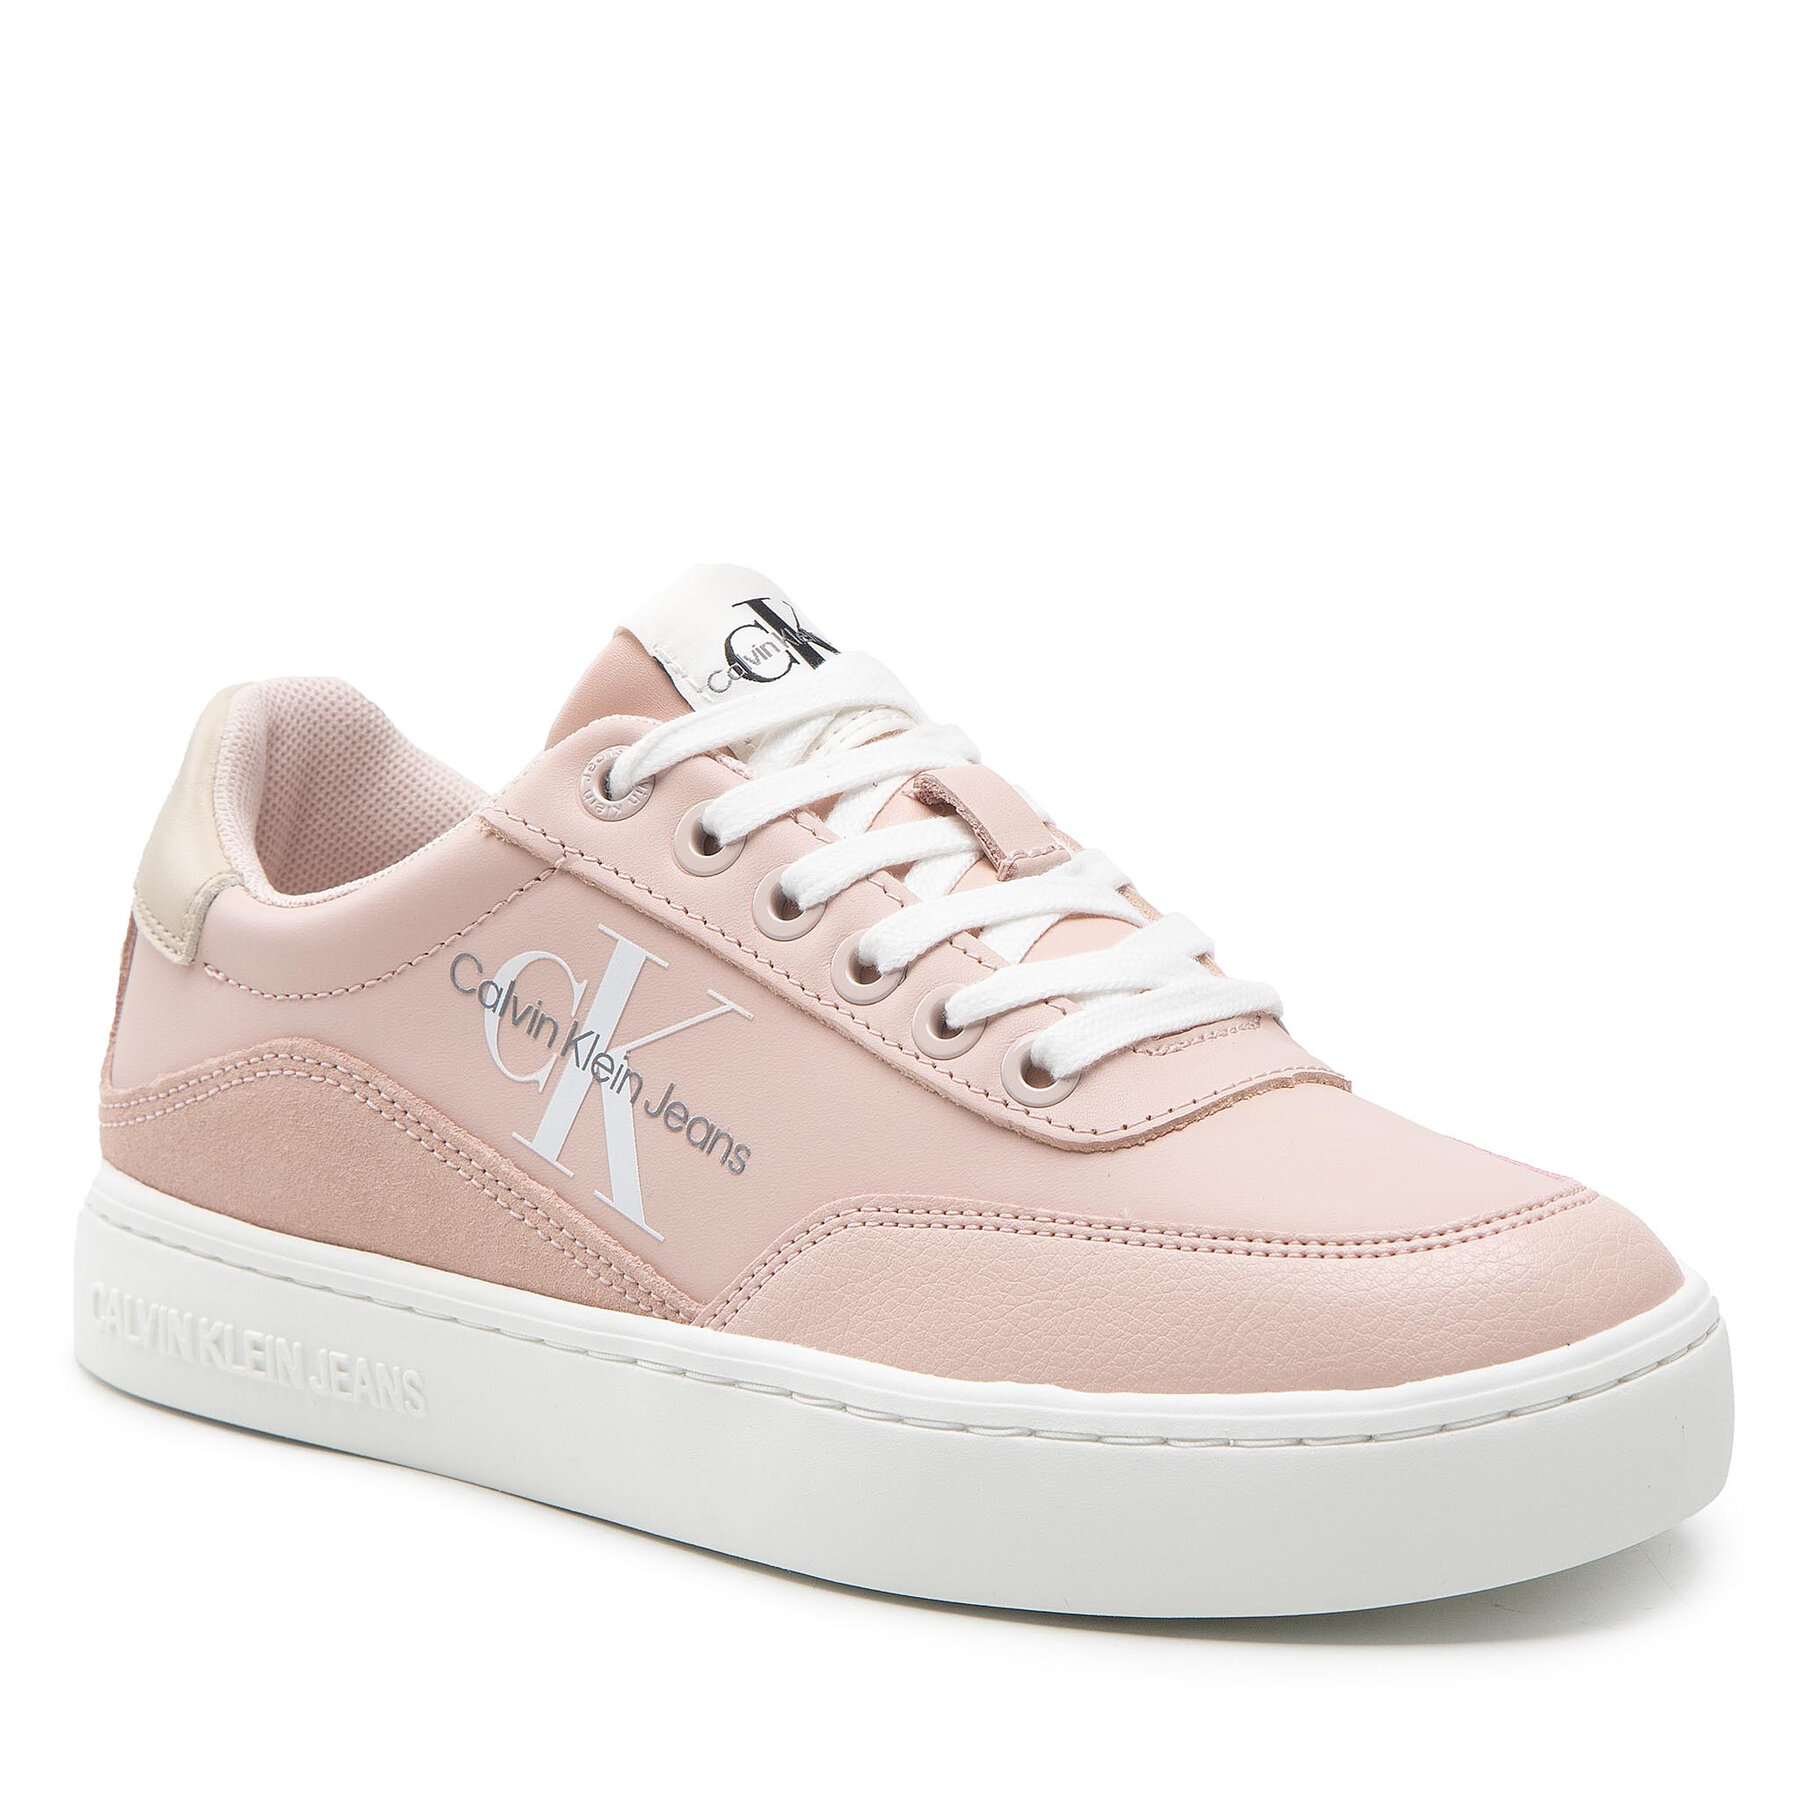 Sneakers Calvin Klein Jeans Classic Cupsole Laceup Low Lth YW0YW00699 Pink Blush/Tuscan Beige 0JX CALVIN KLEIN JEANS imagine noua